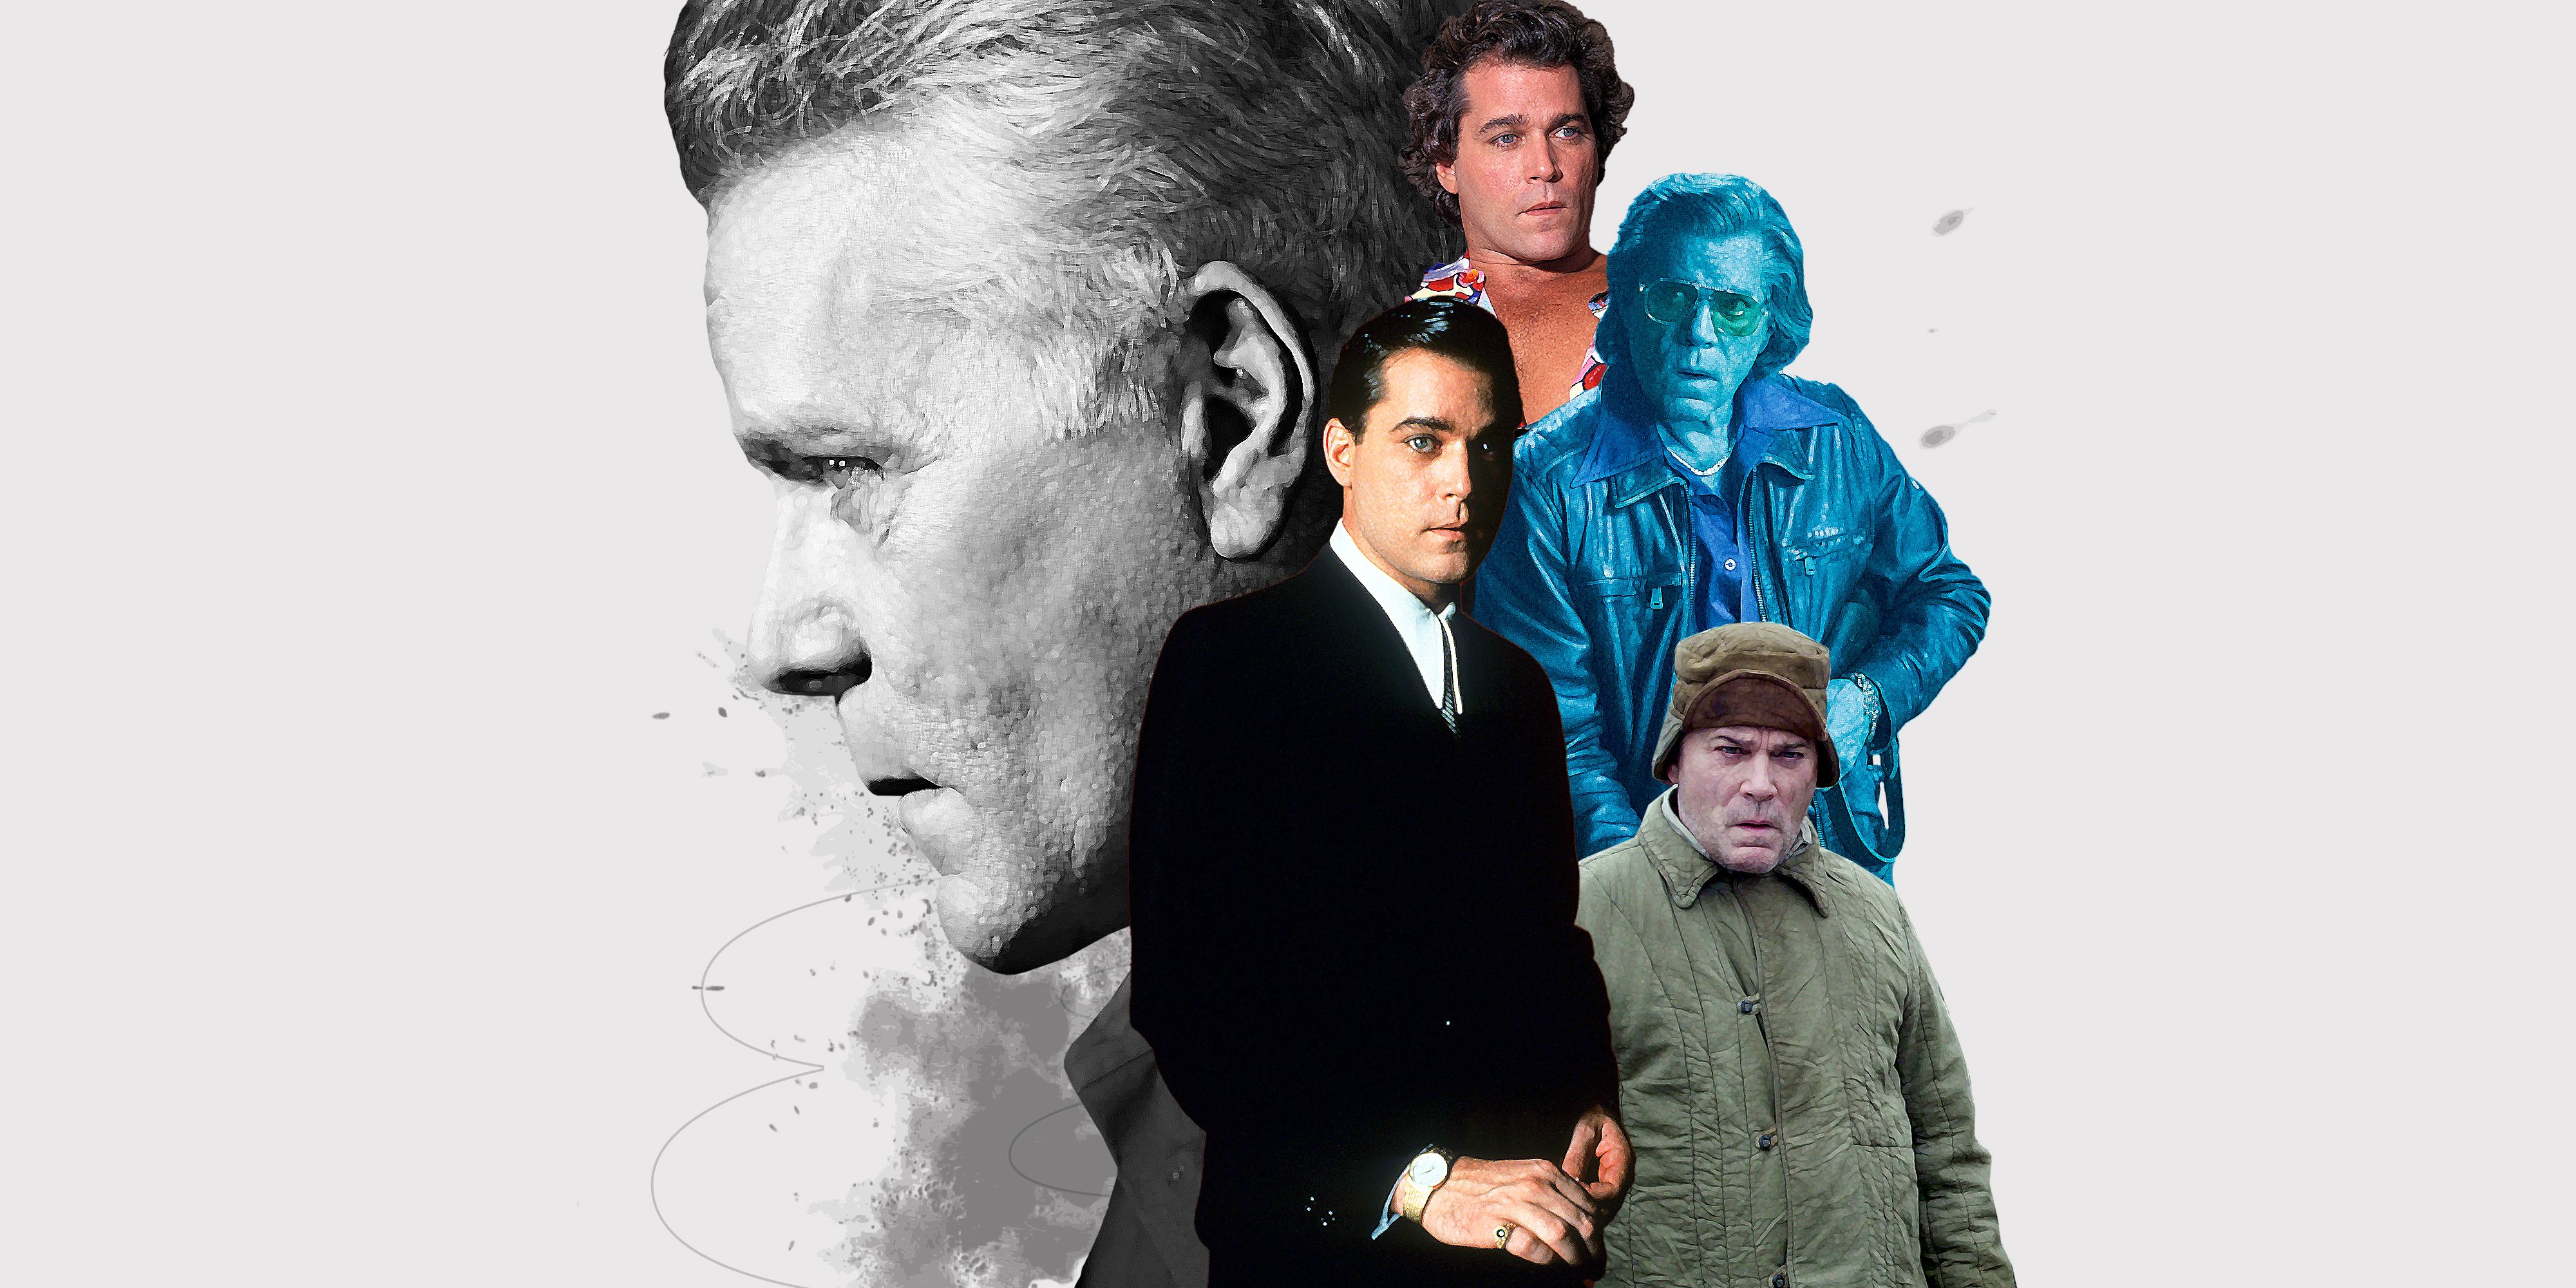 Ray Liotta Tributes Elizabeth Banks, Jeff Daniels, Sigourney Weaver, Melanie Griffith, Andy Garcia and More on Legend